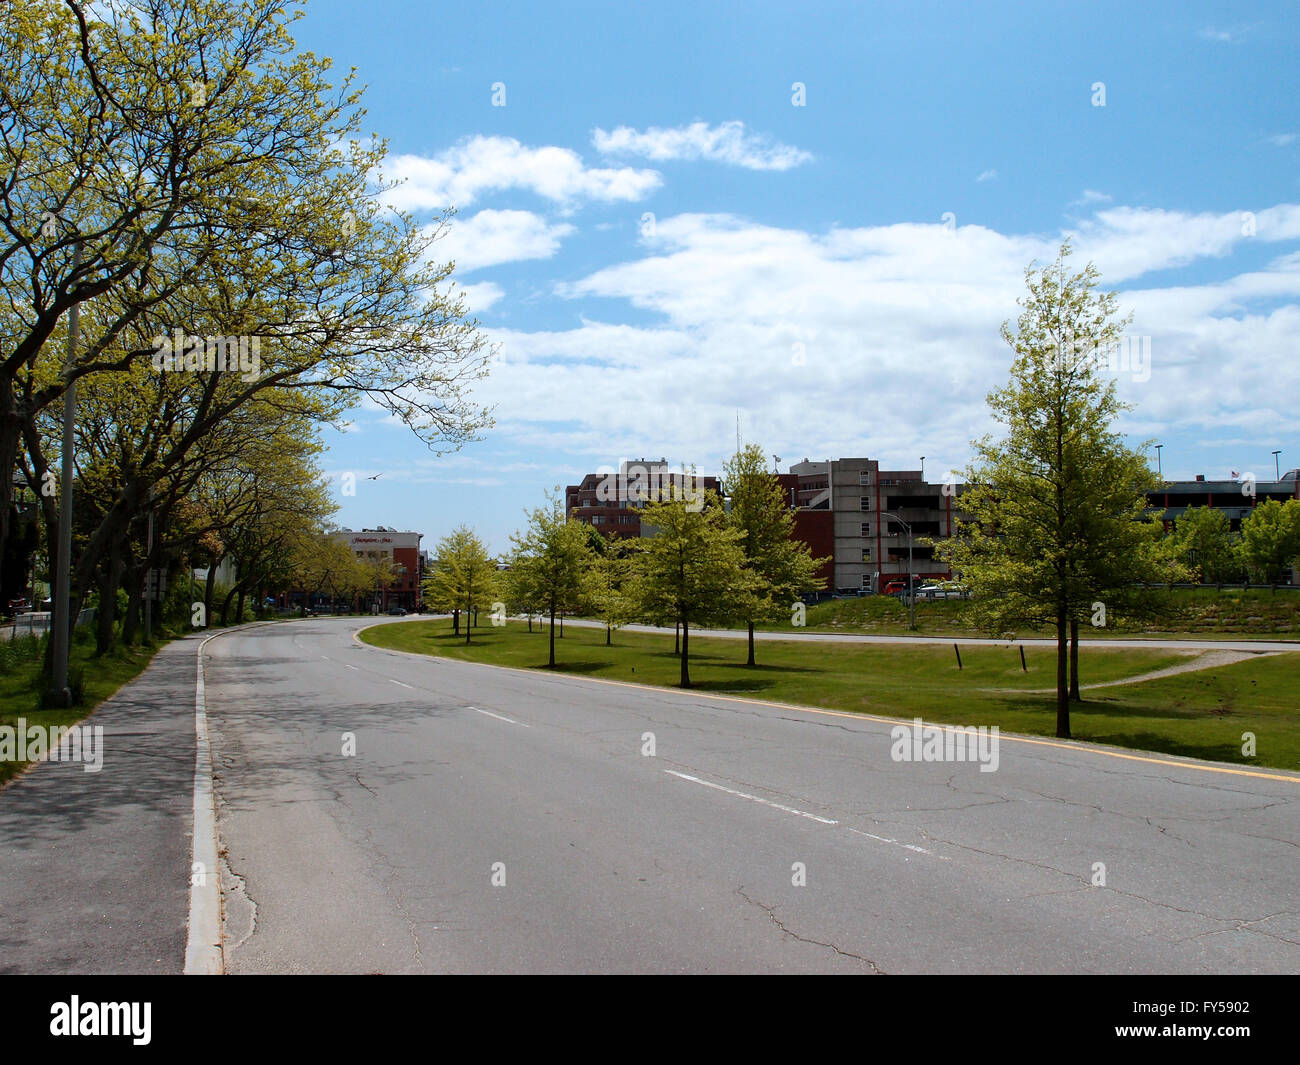 Highway one road surrounded by trees, clouds, and bird flying in the air in Portland, Maine. Stock Photo